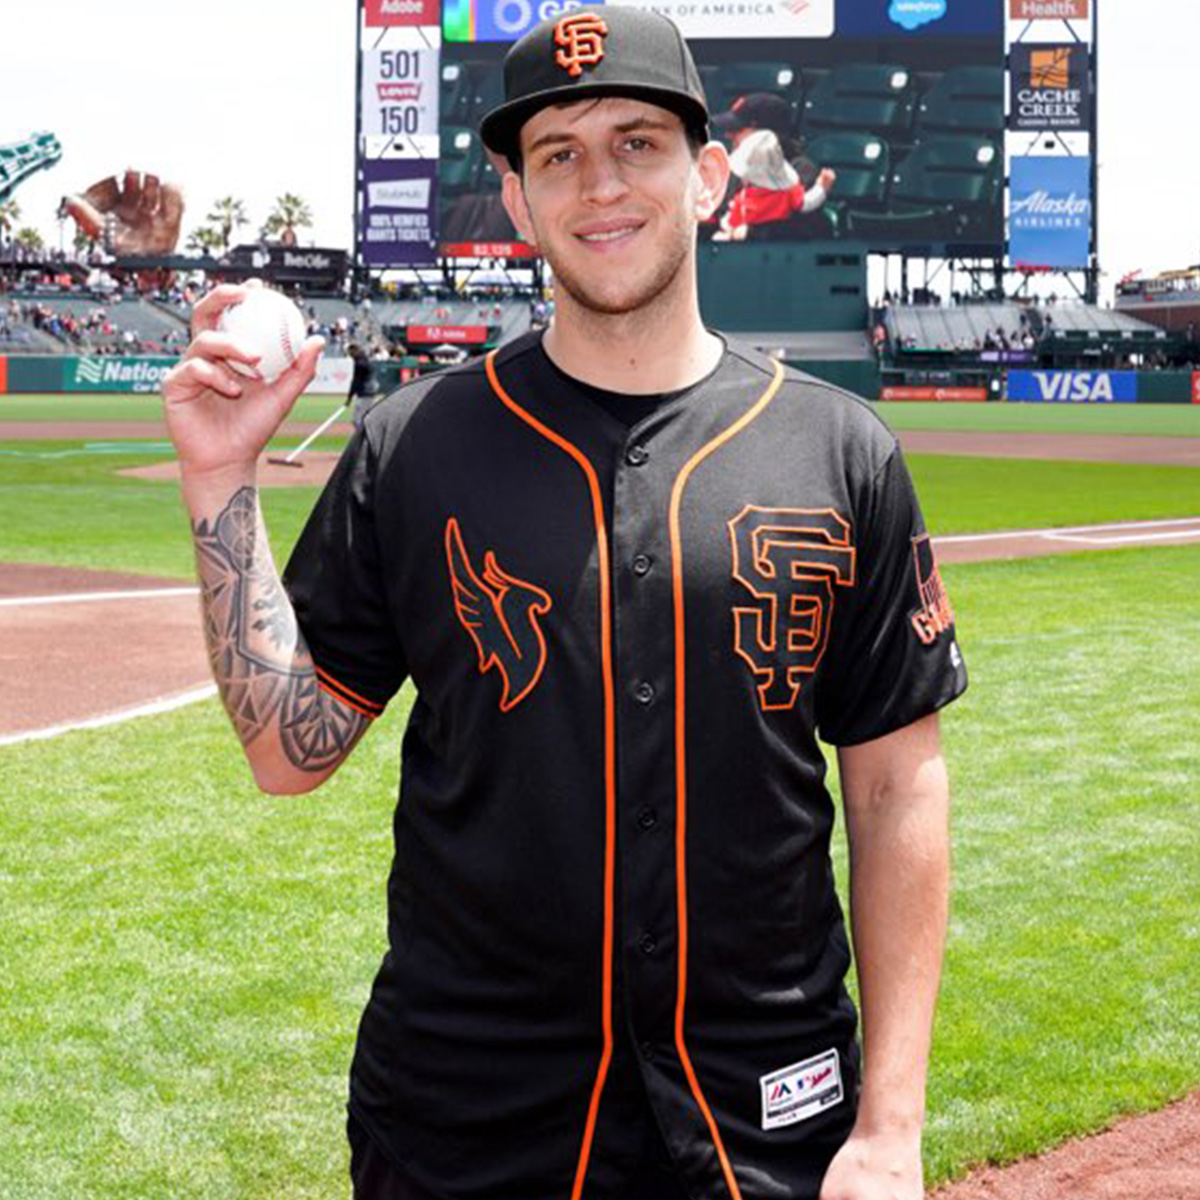 MLB Life on X: Illenium pulled up to the Giants game with his own